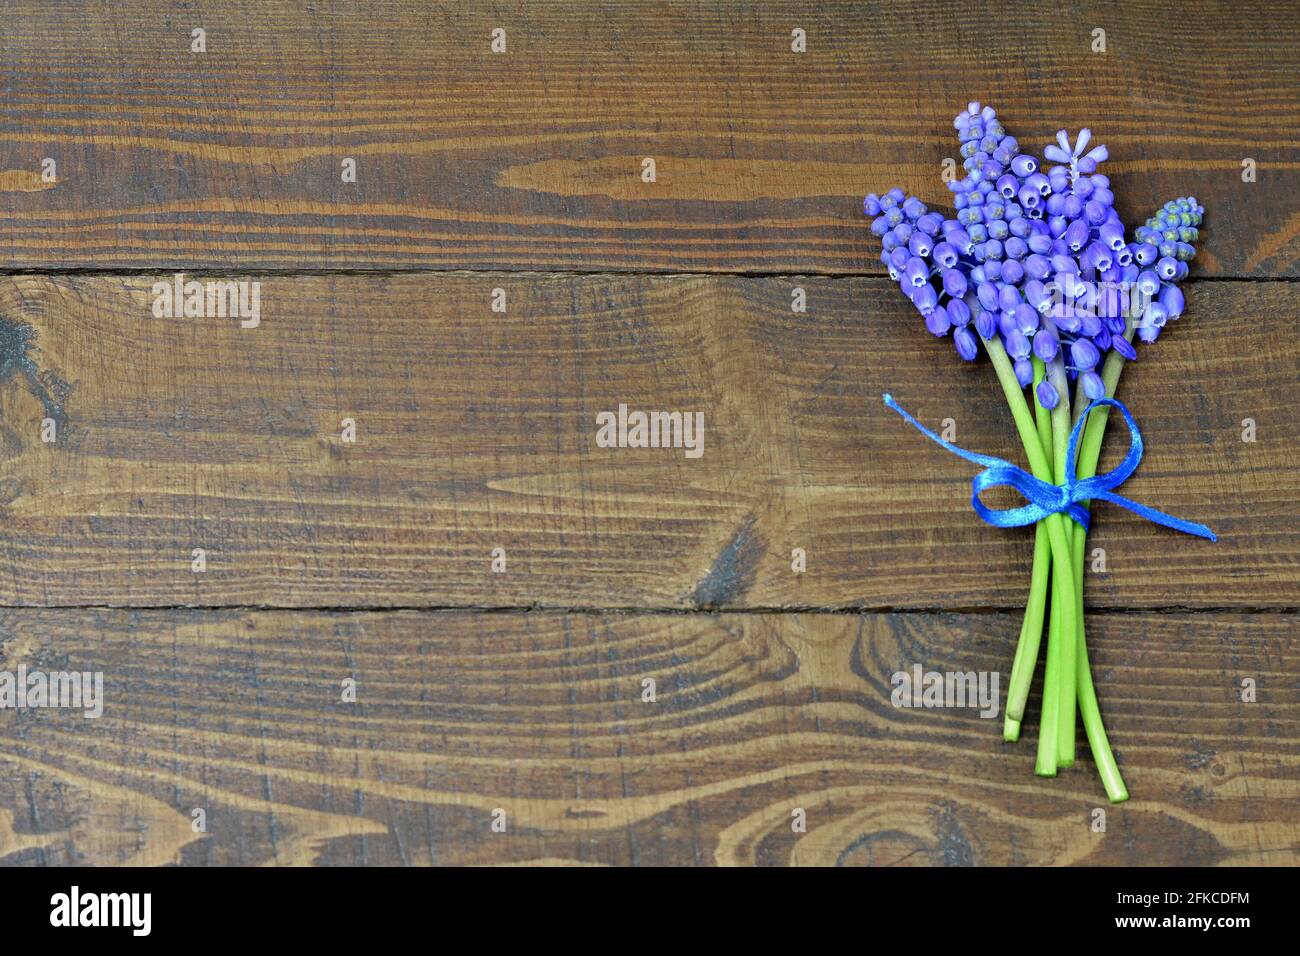 Mothers Day background with bouquet of grape hyacinth flowers Stock Photo